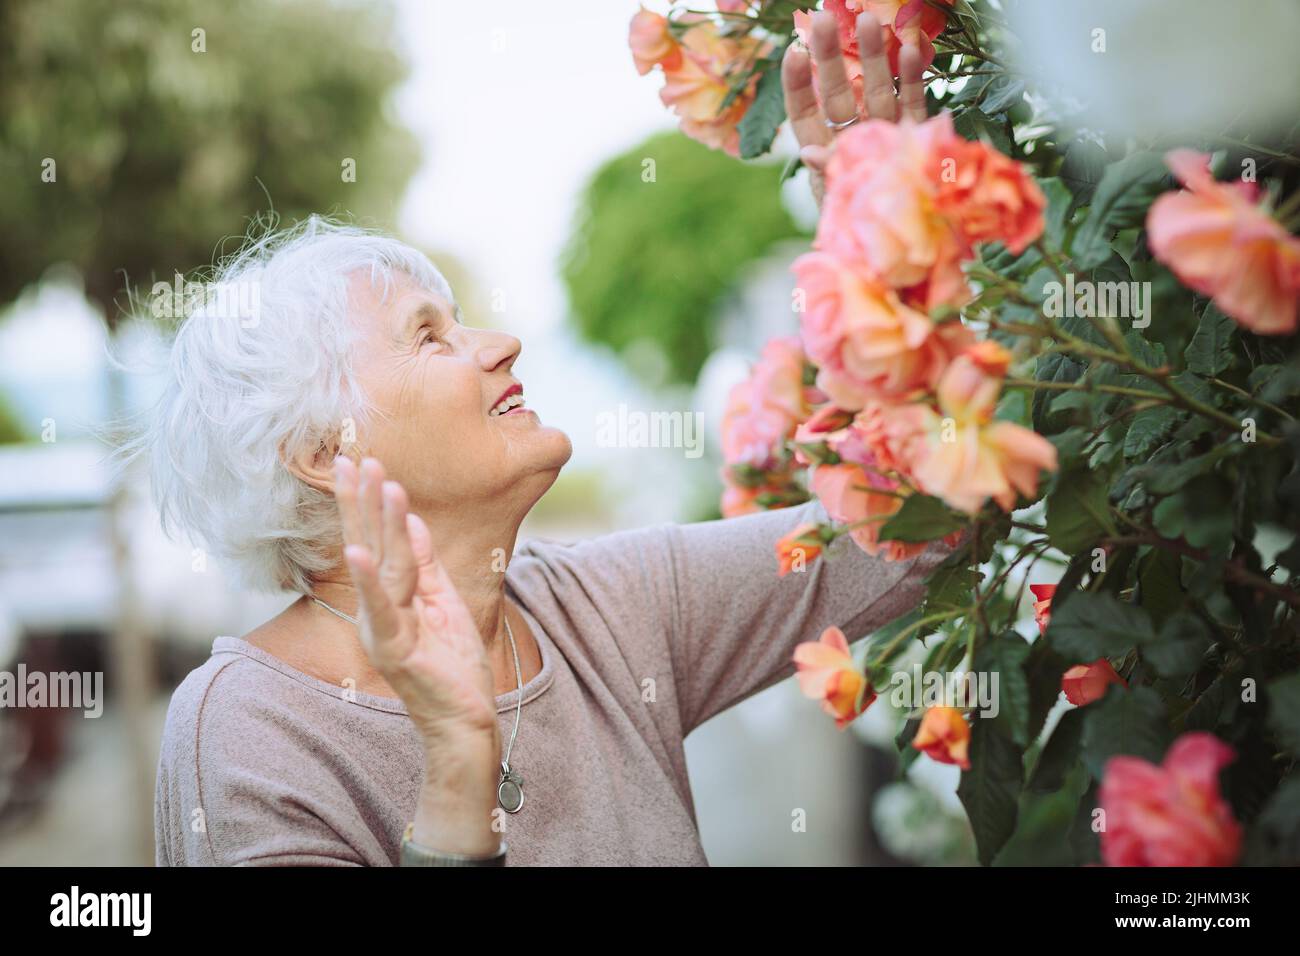 Elderly woman admiring beautiful bushes with colorful roses Stock Photo